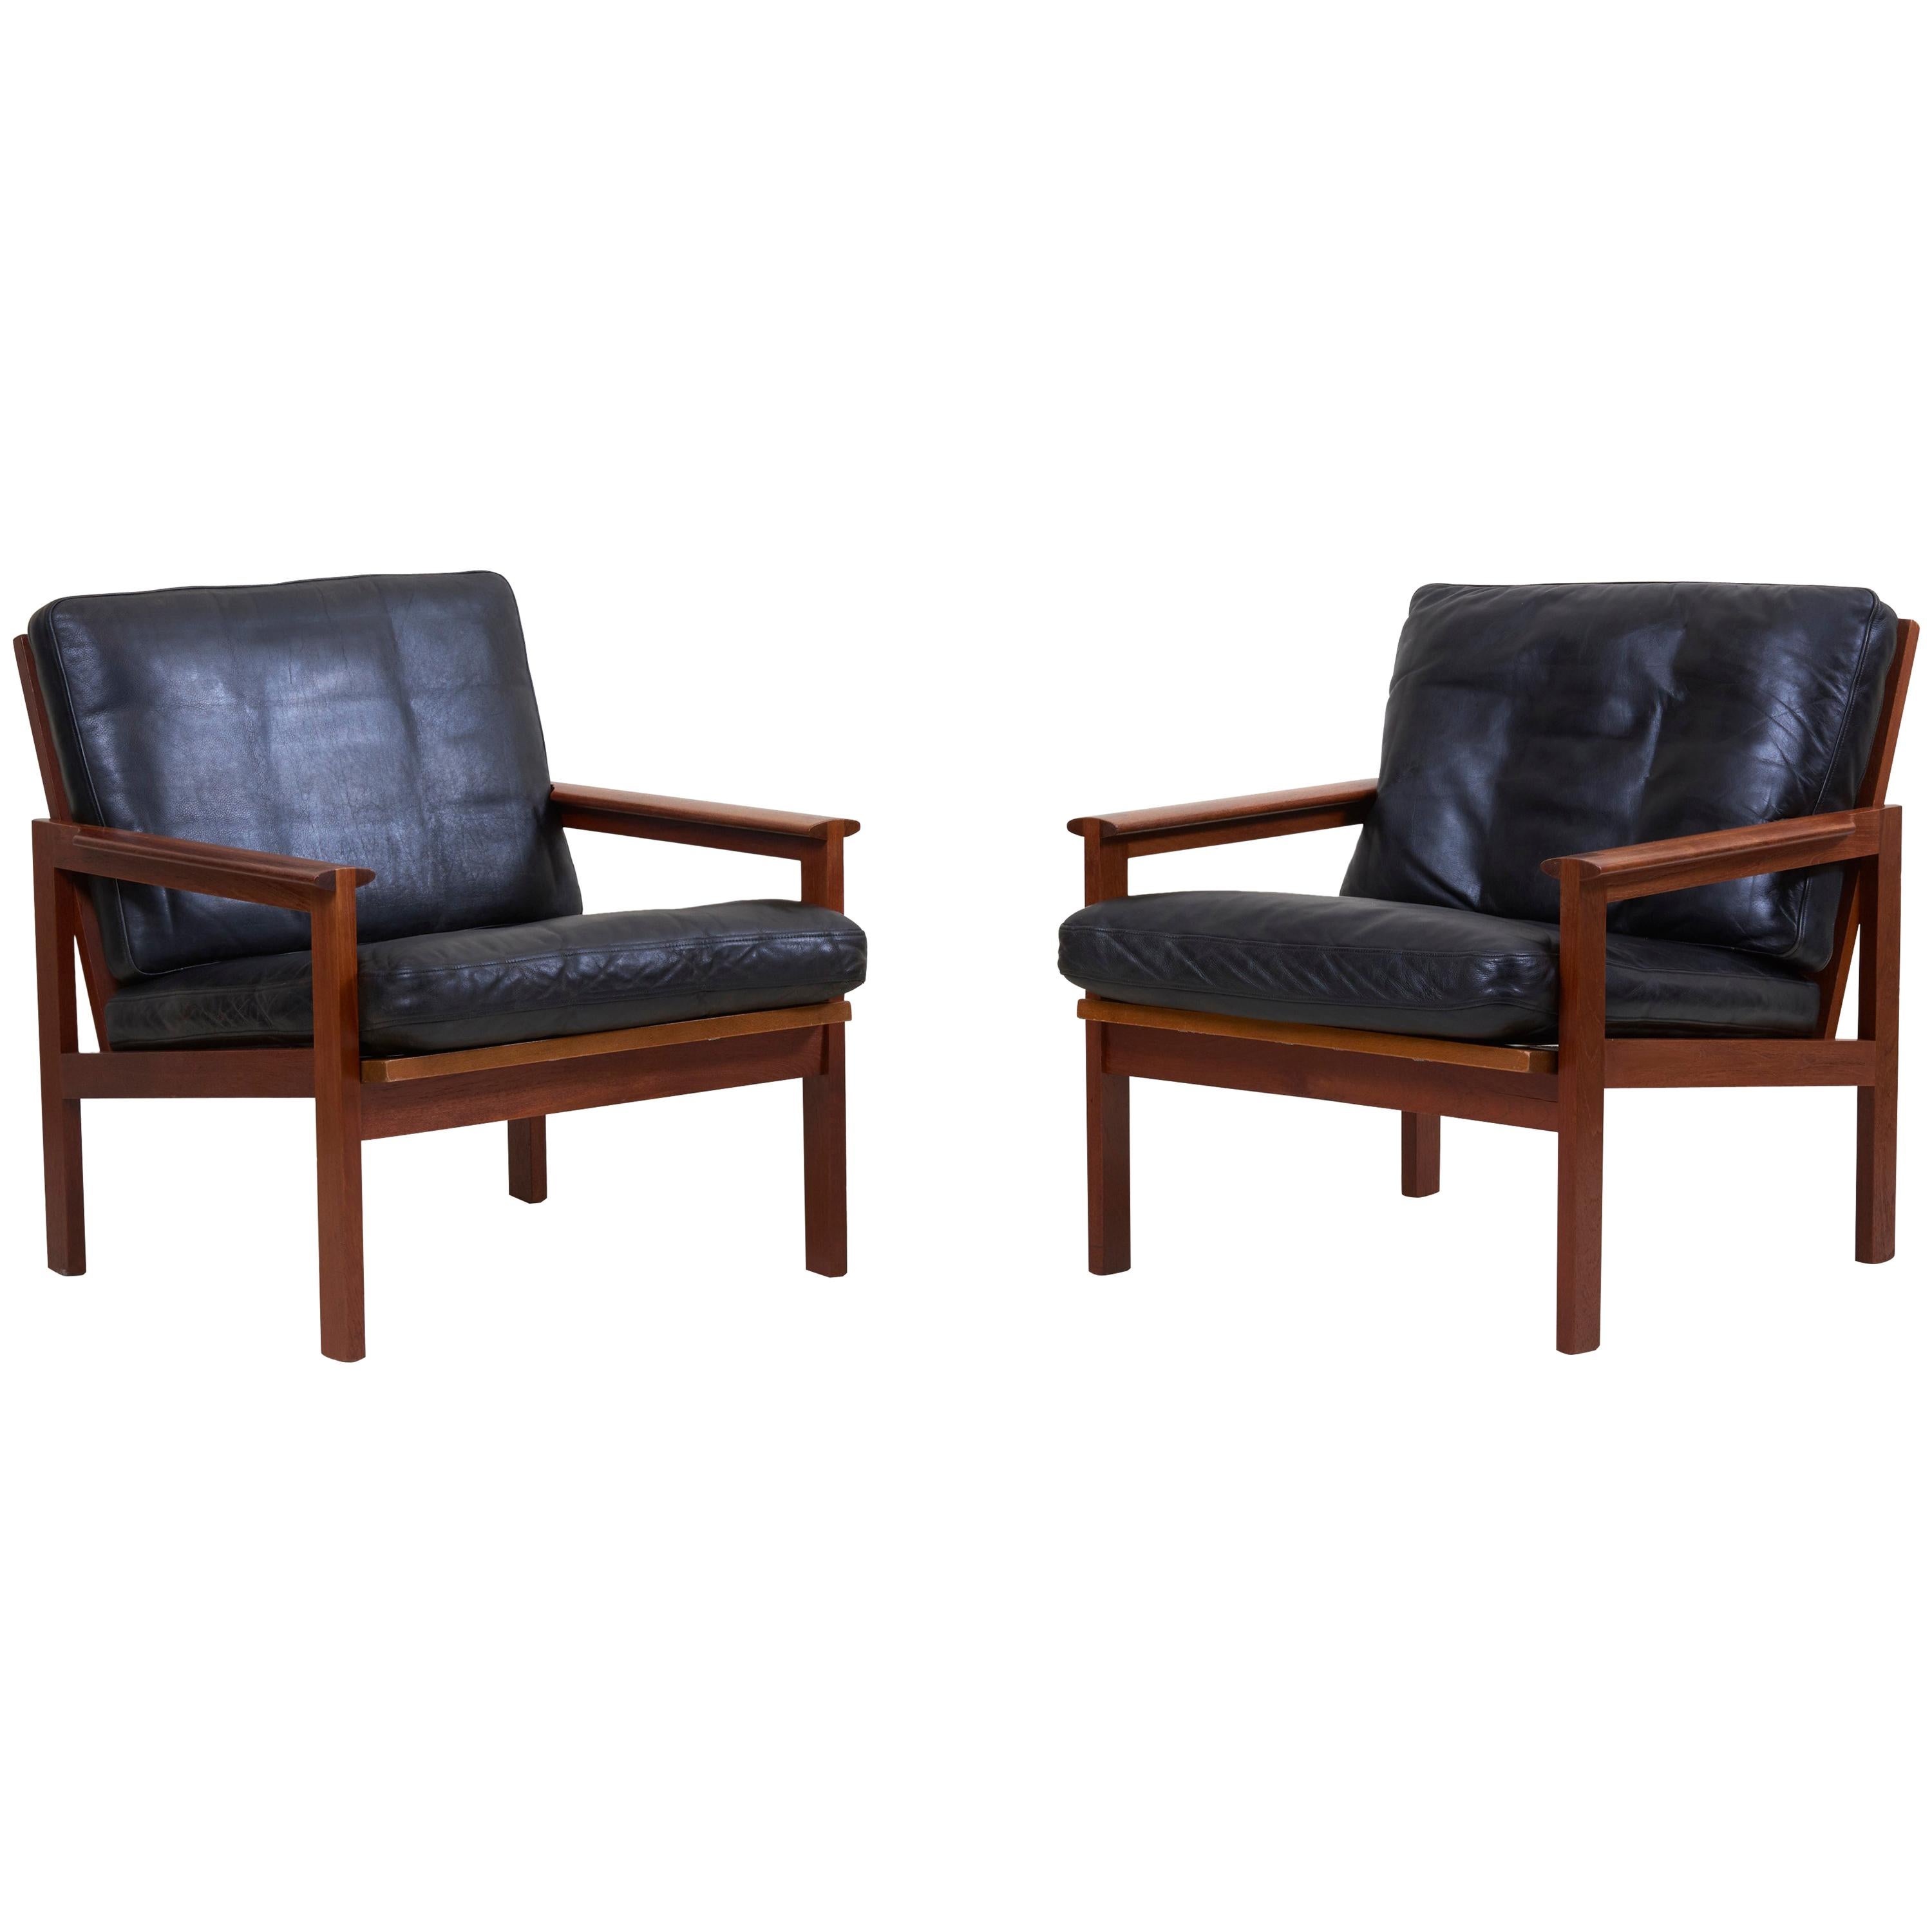 Pair of Lounge Chairs in Teak and Leather by Danish Architect Illum Wikkelsø